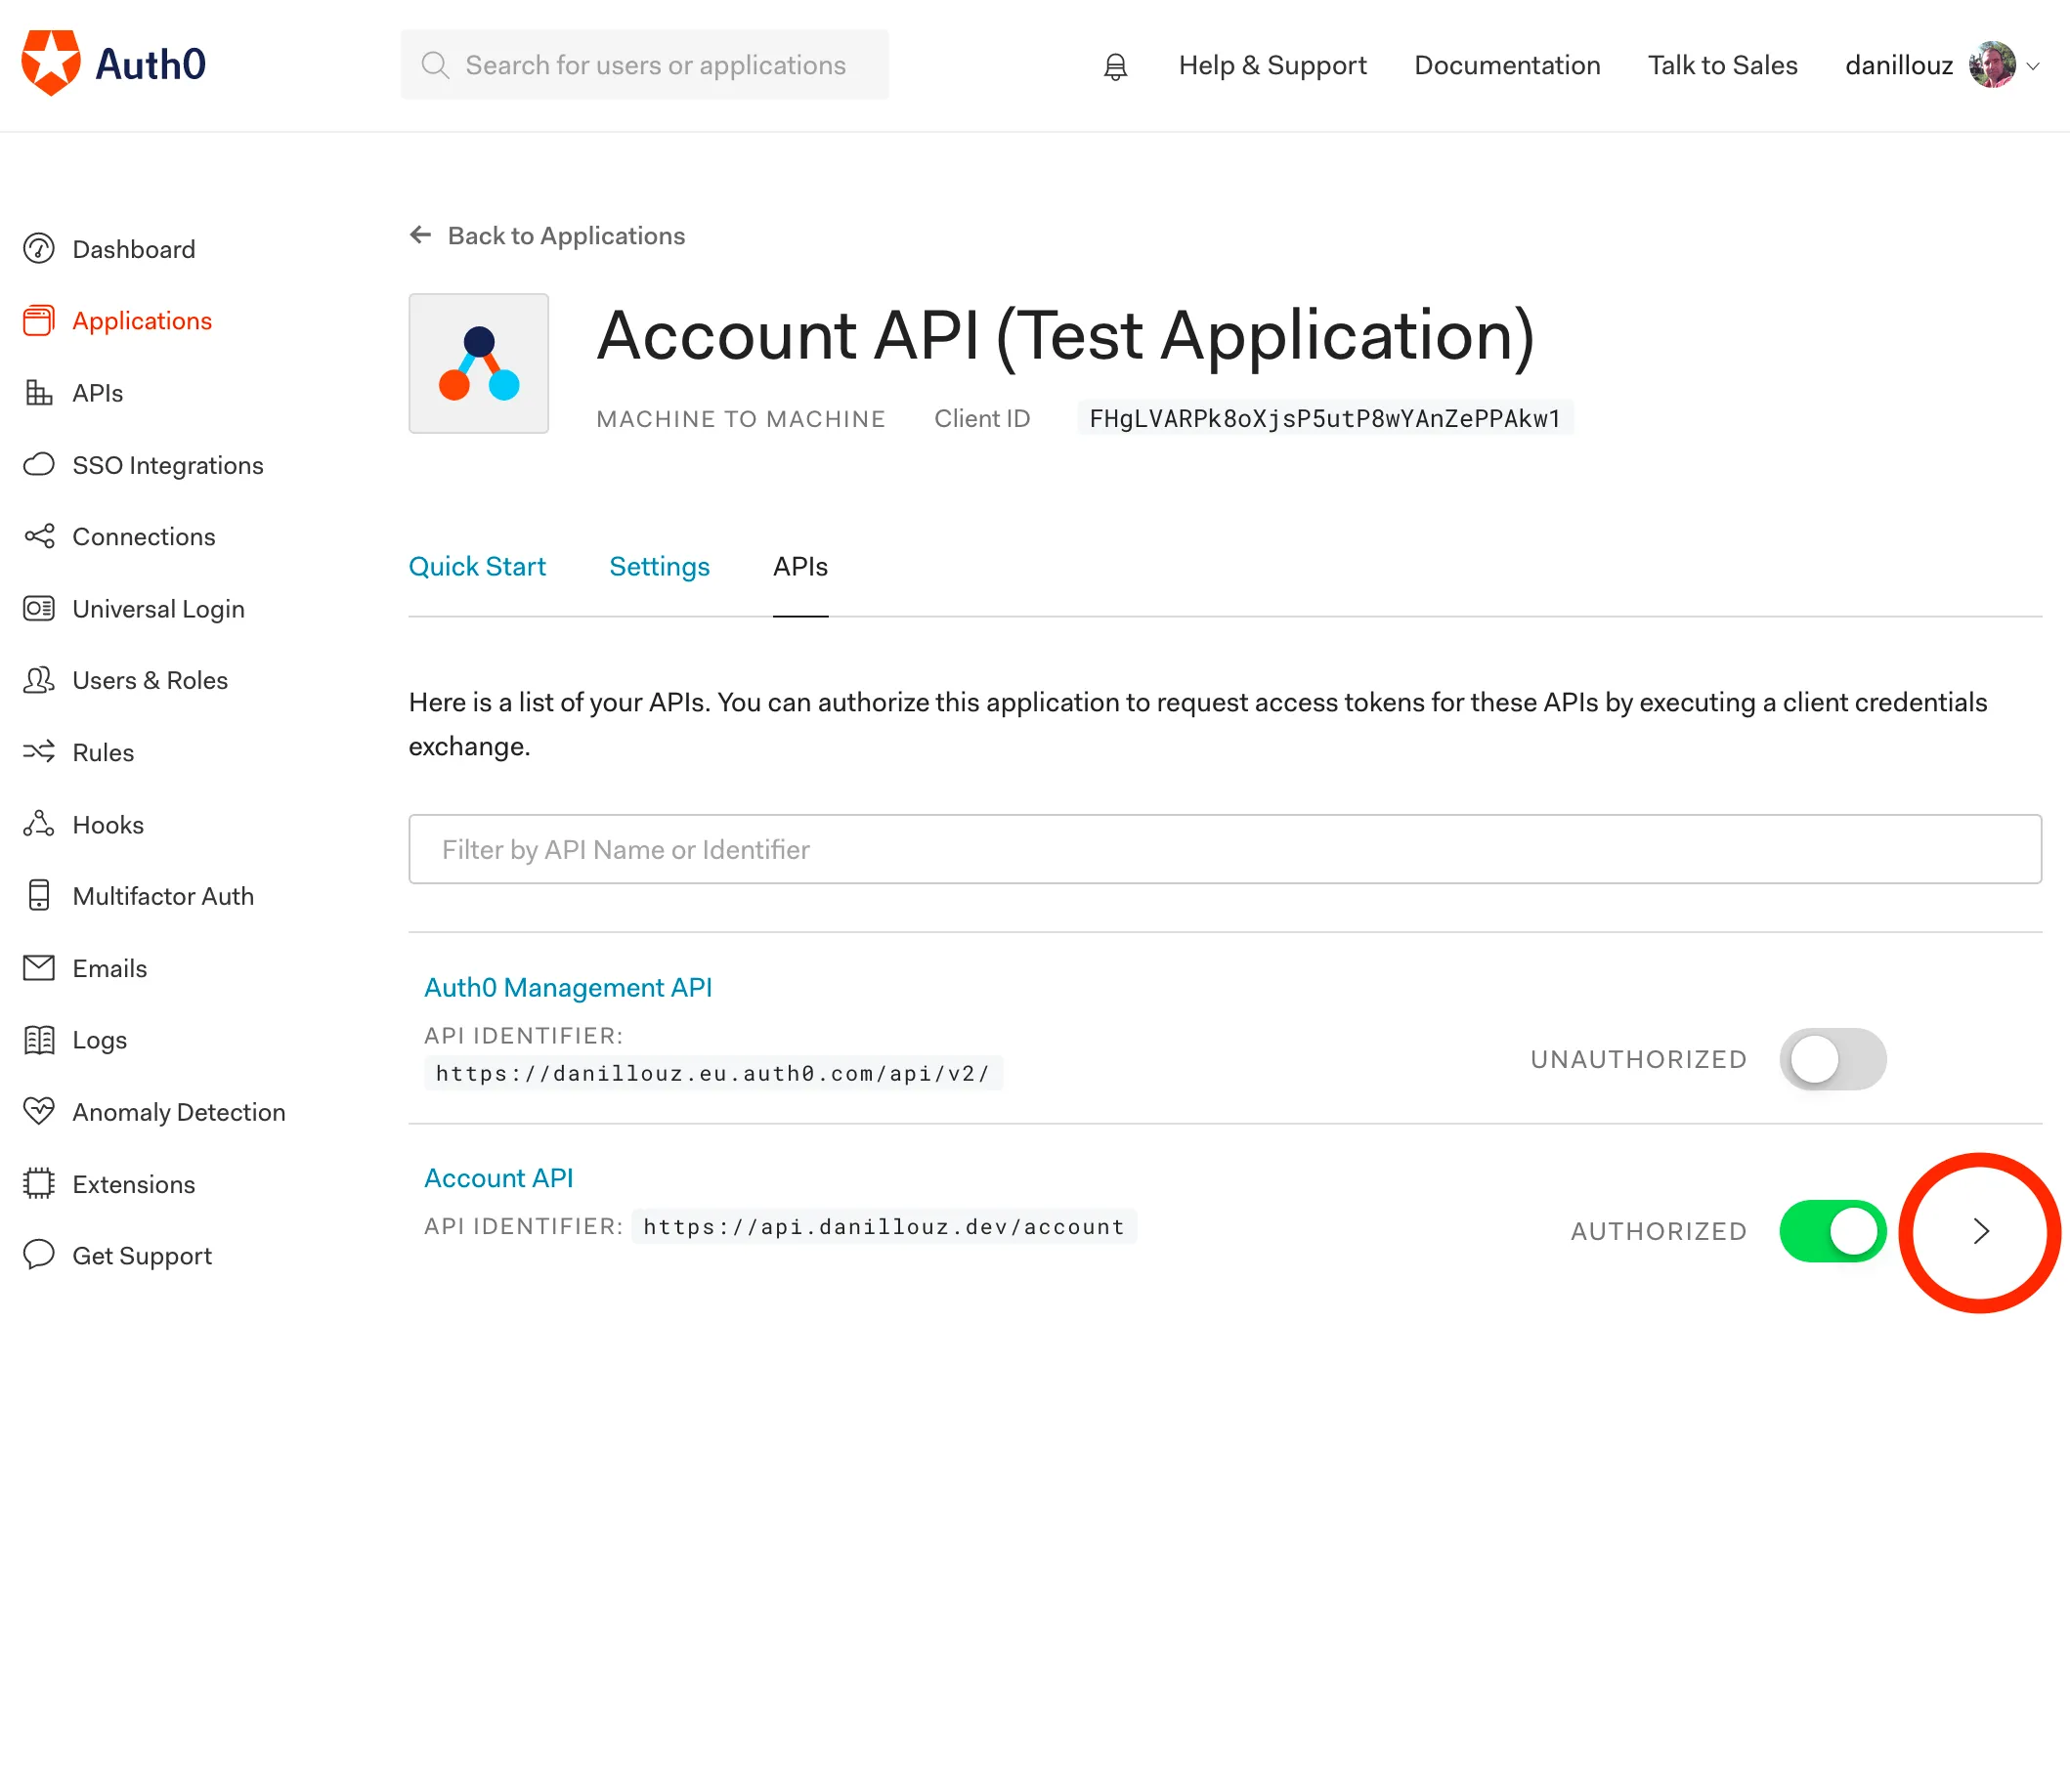 Image that shows the Auth0 test application authorization settings.